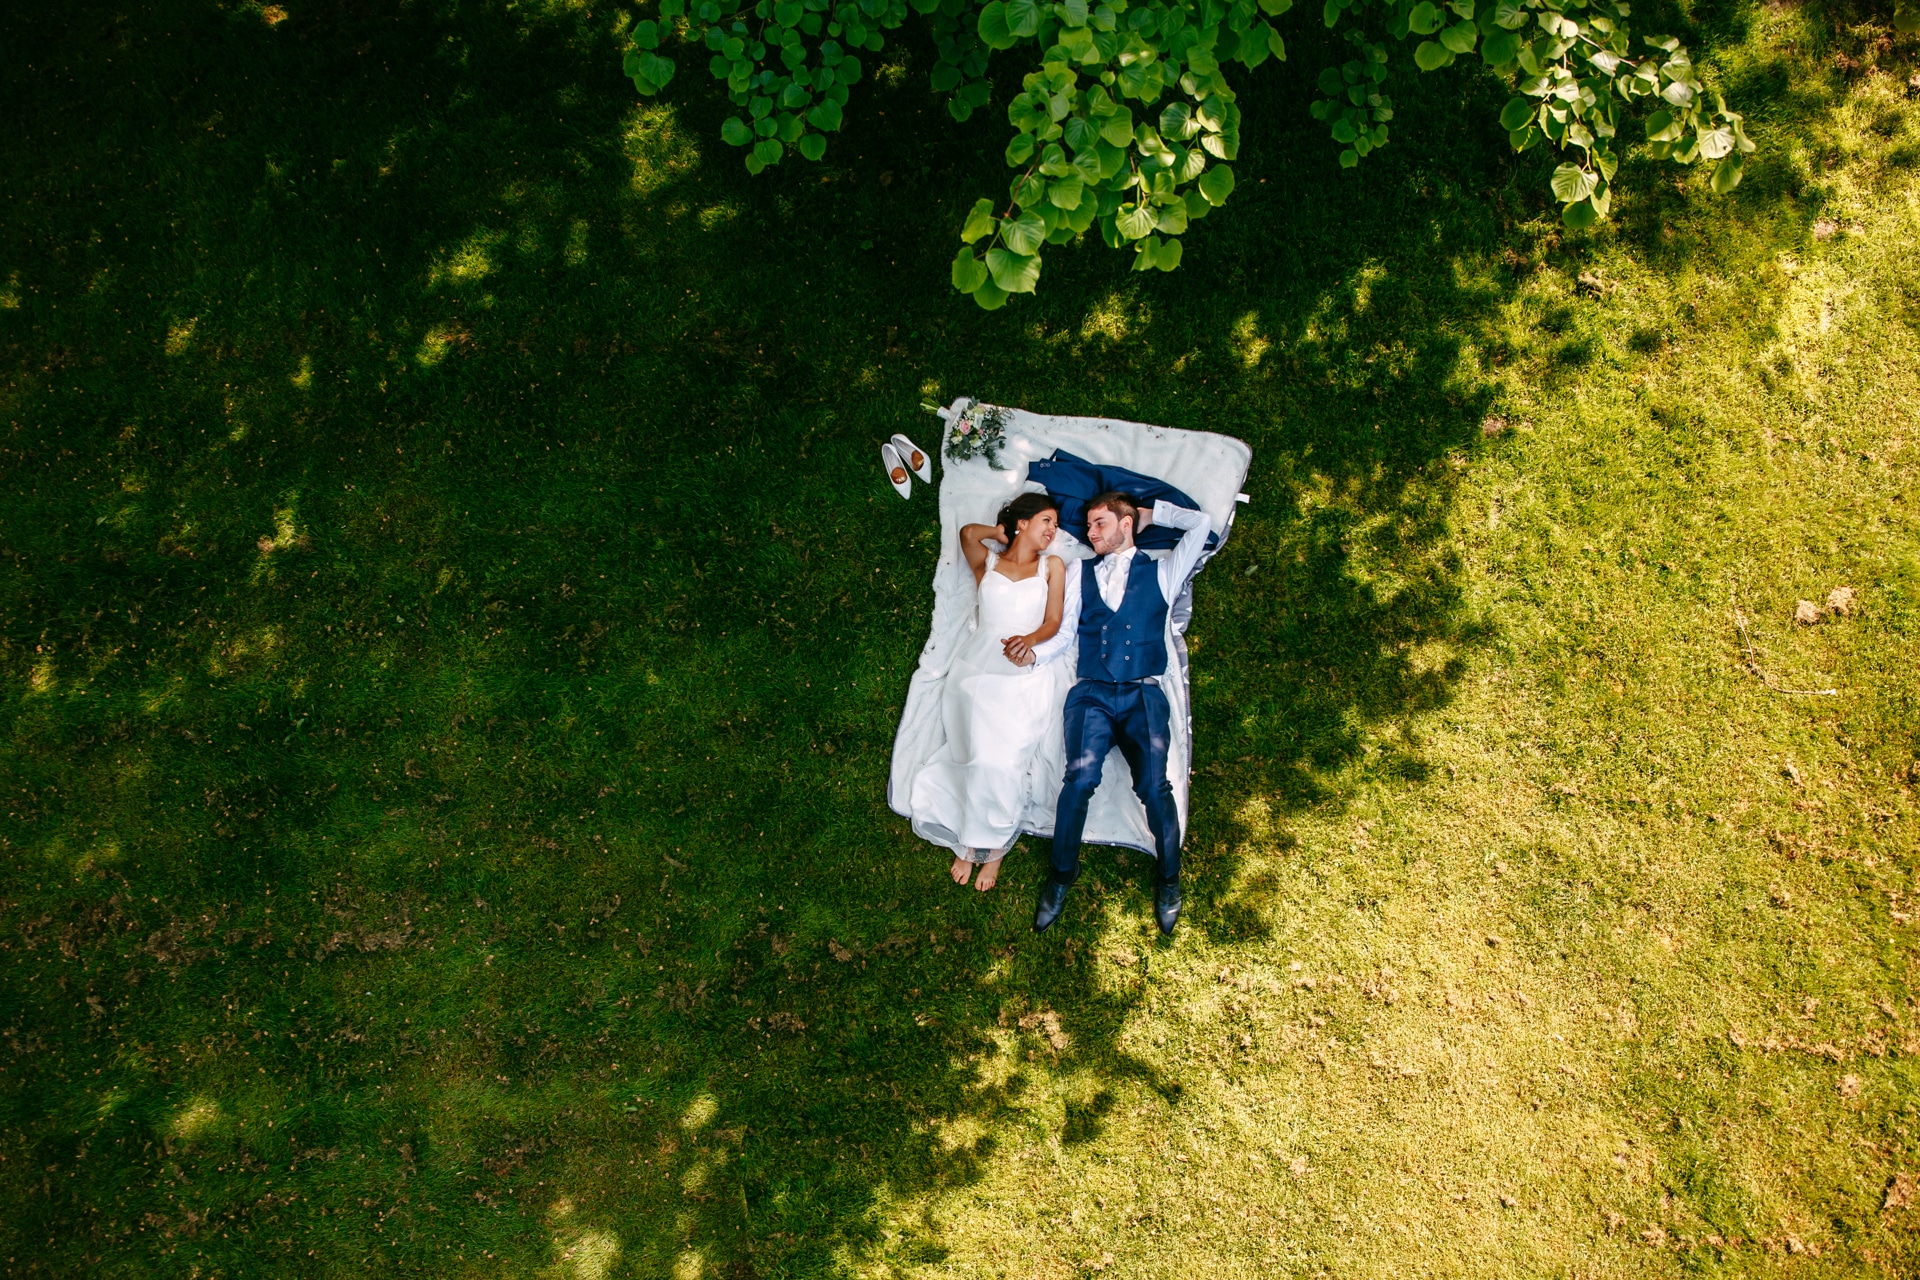 Bridal couple lying on the grass in a forest